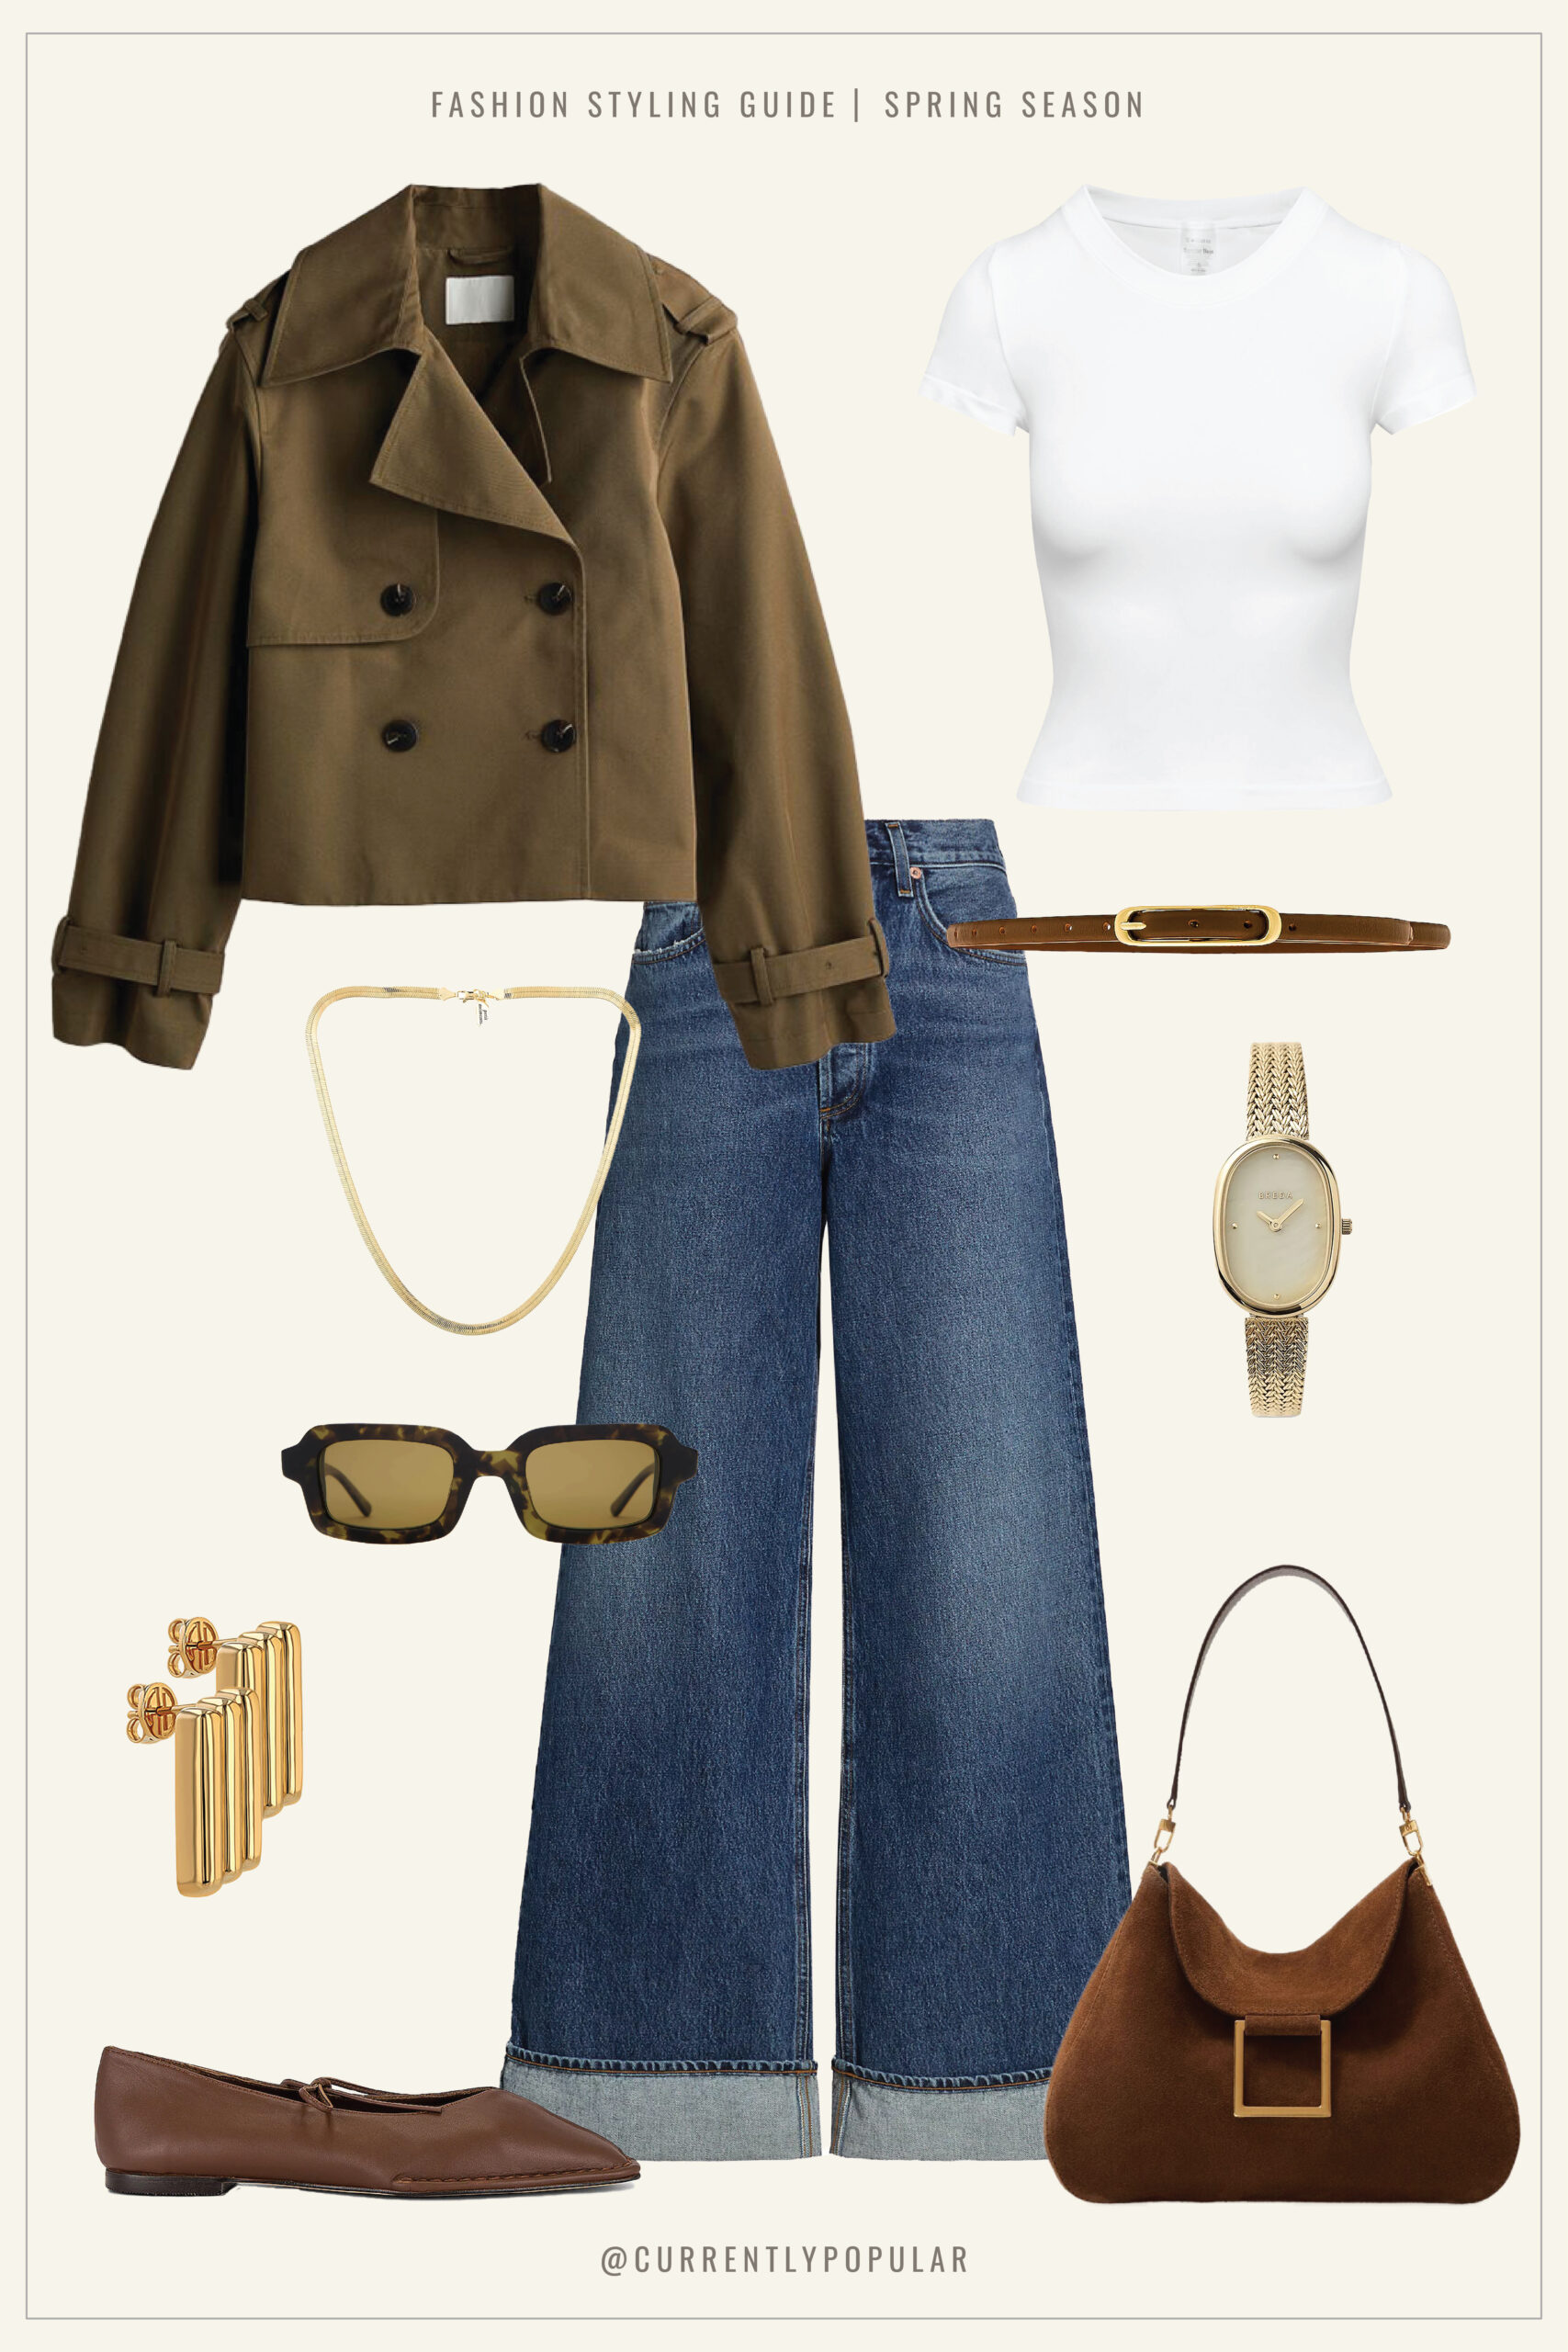 A styled look featuring a cropped trench coat, white tee, blue jeans, brown belt, and loafers, accessorized with a gold necklace, watch, sunglasses, stacked rings, and a suede handbag